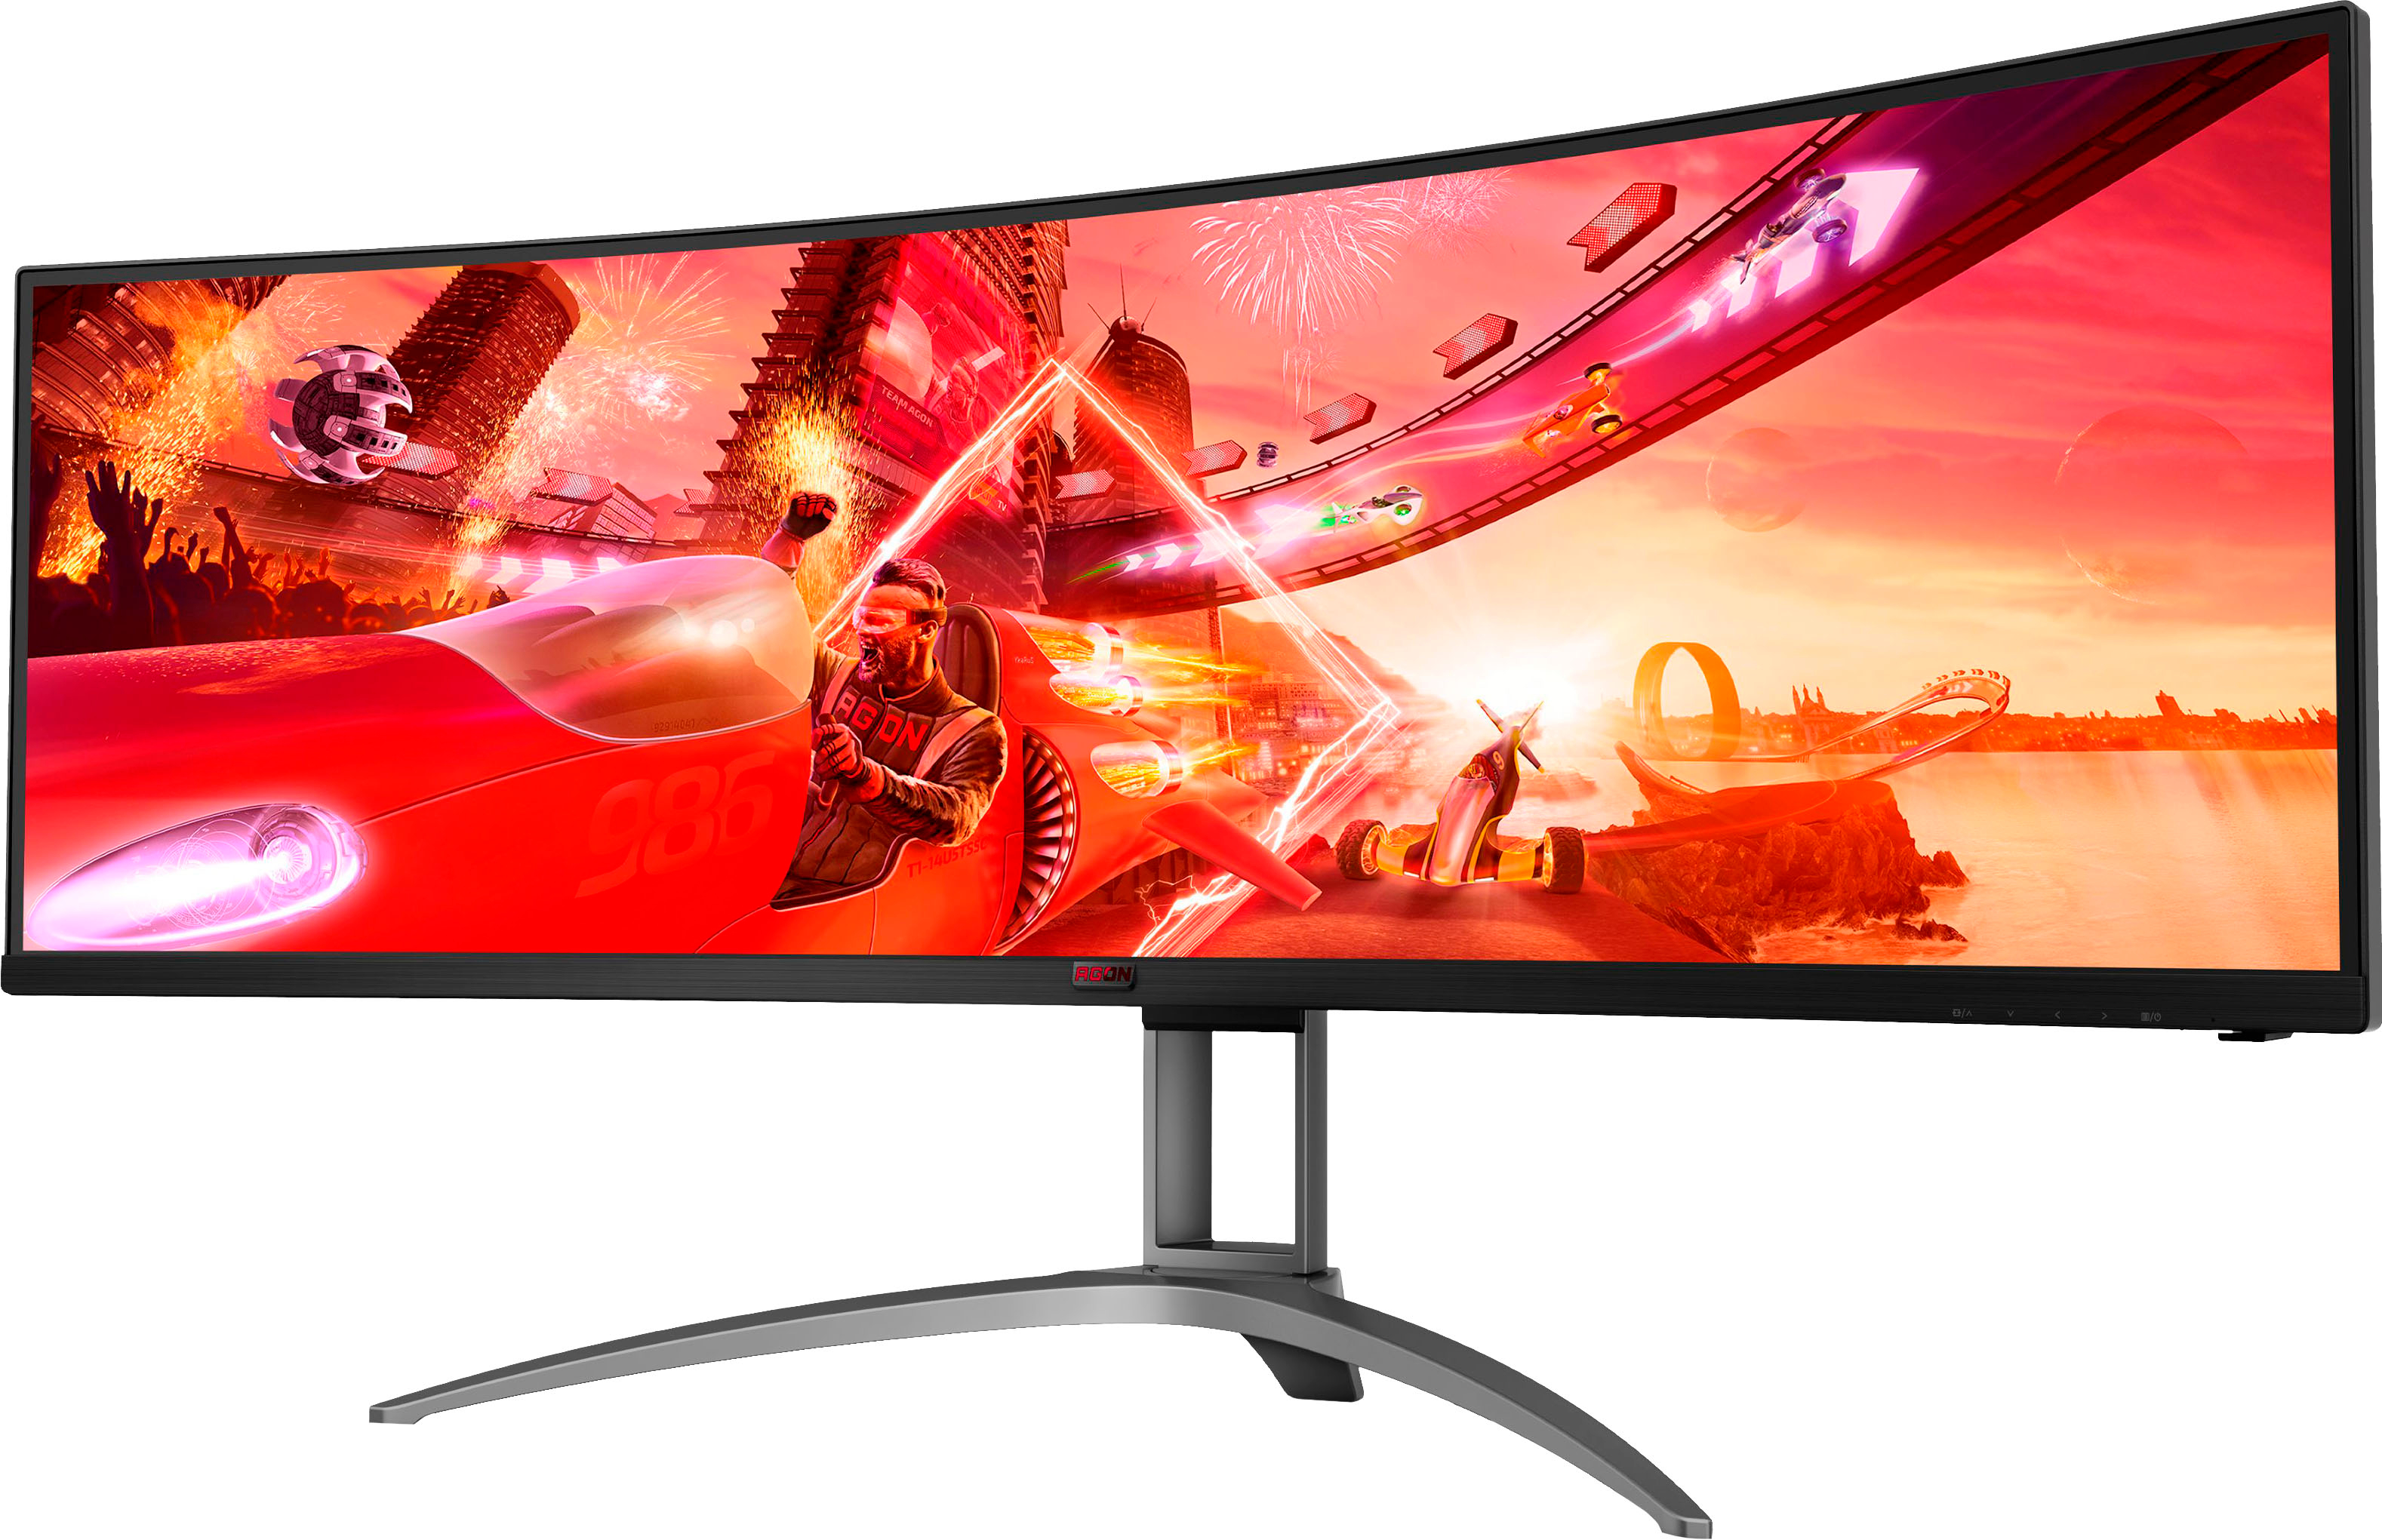 AOC AG493UCX2 49 LCD 4K UWHD Gaming Monitor Black/Red AG493UCX2 - Best Buy